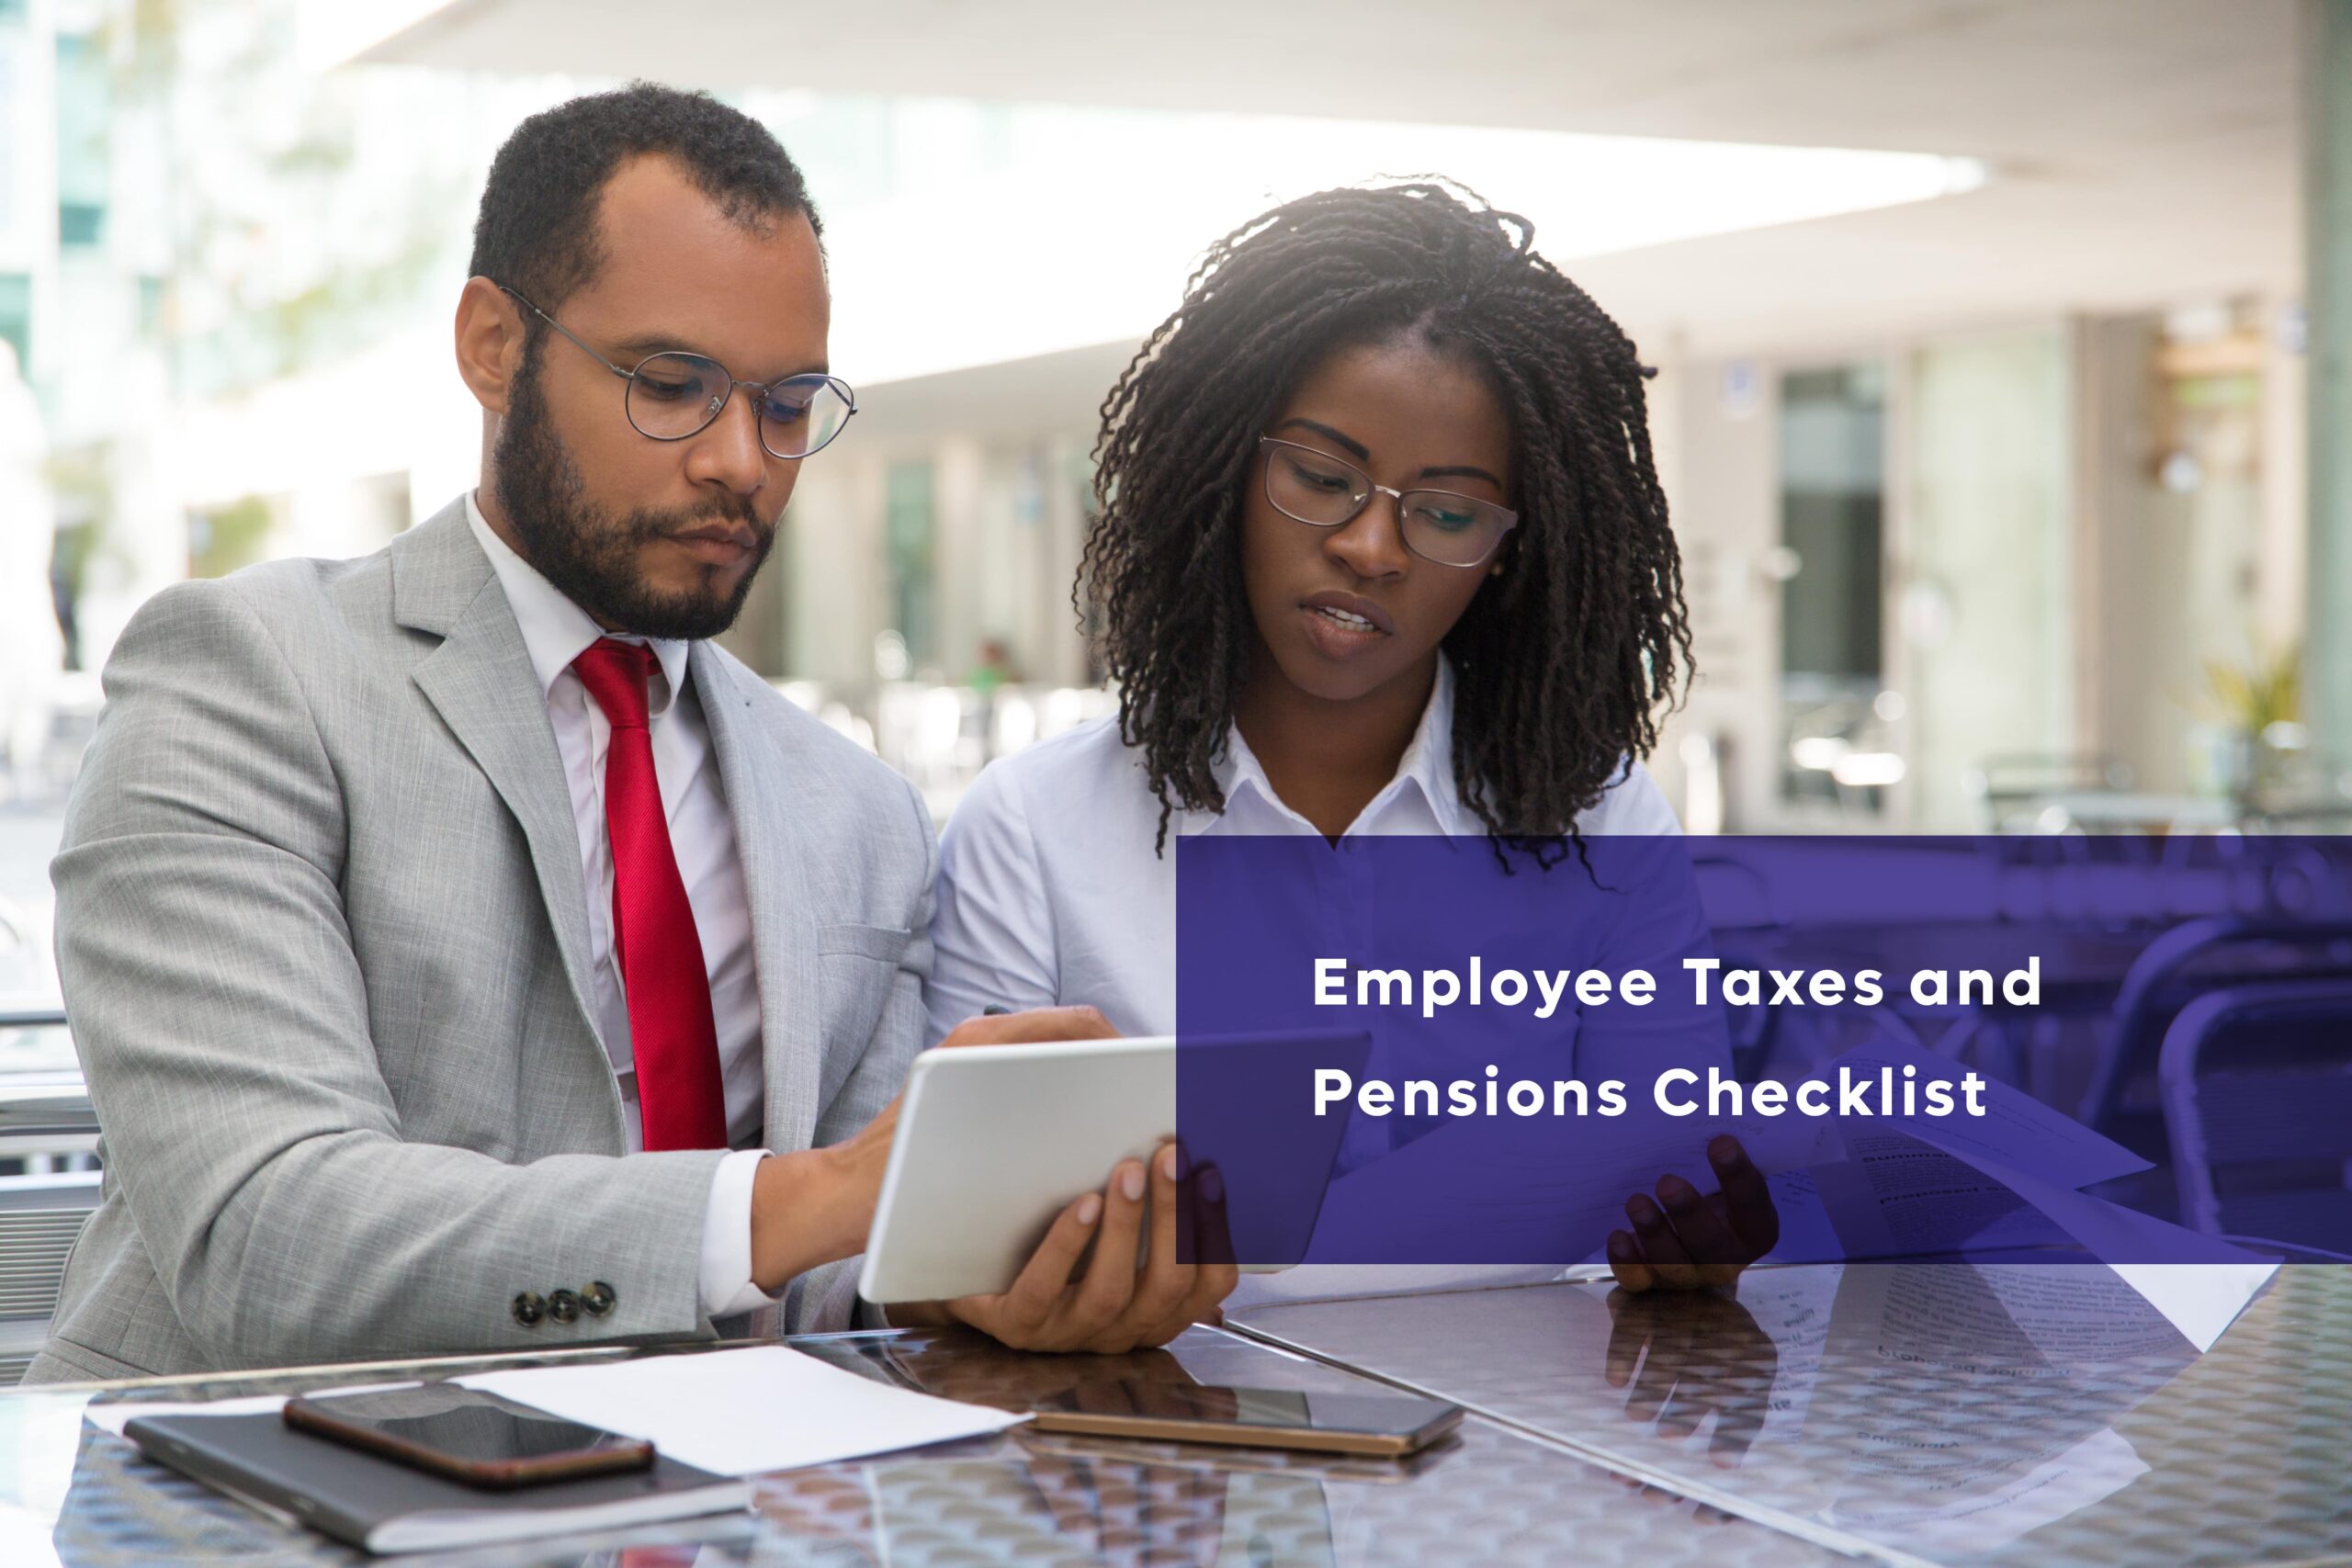 Employee Taxes and Pensions Checklist